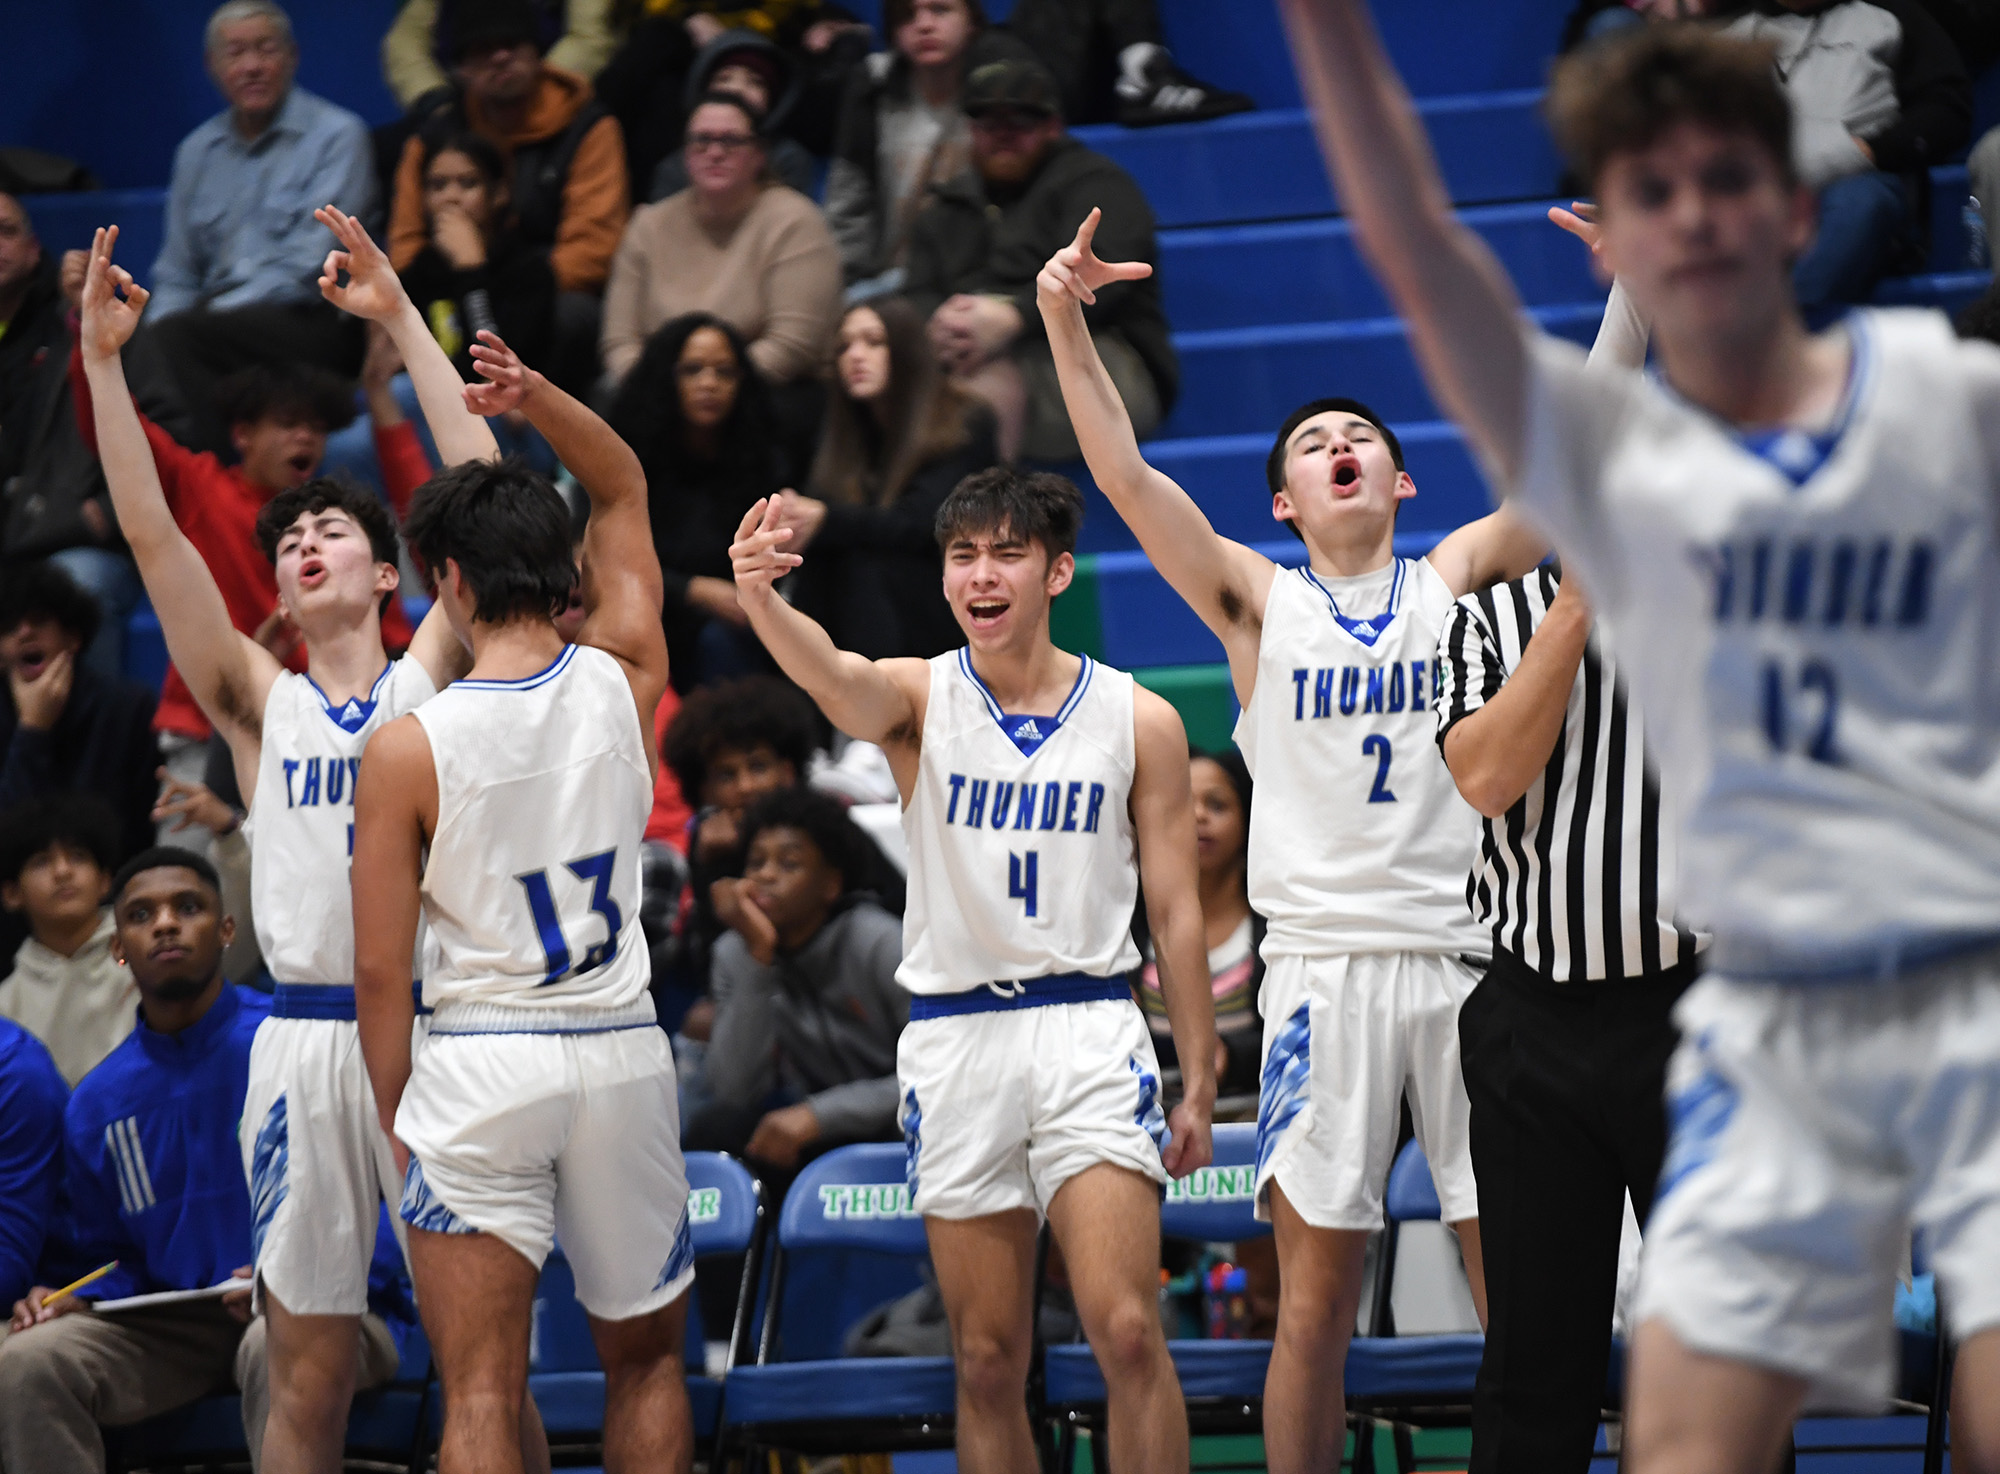 Mountain View players celebrate a basket Tuesday, Nov. 29, 2022, during the Thunder’s 74-60 win against Evergreen at Mountain View High School.